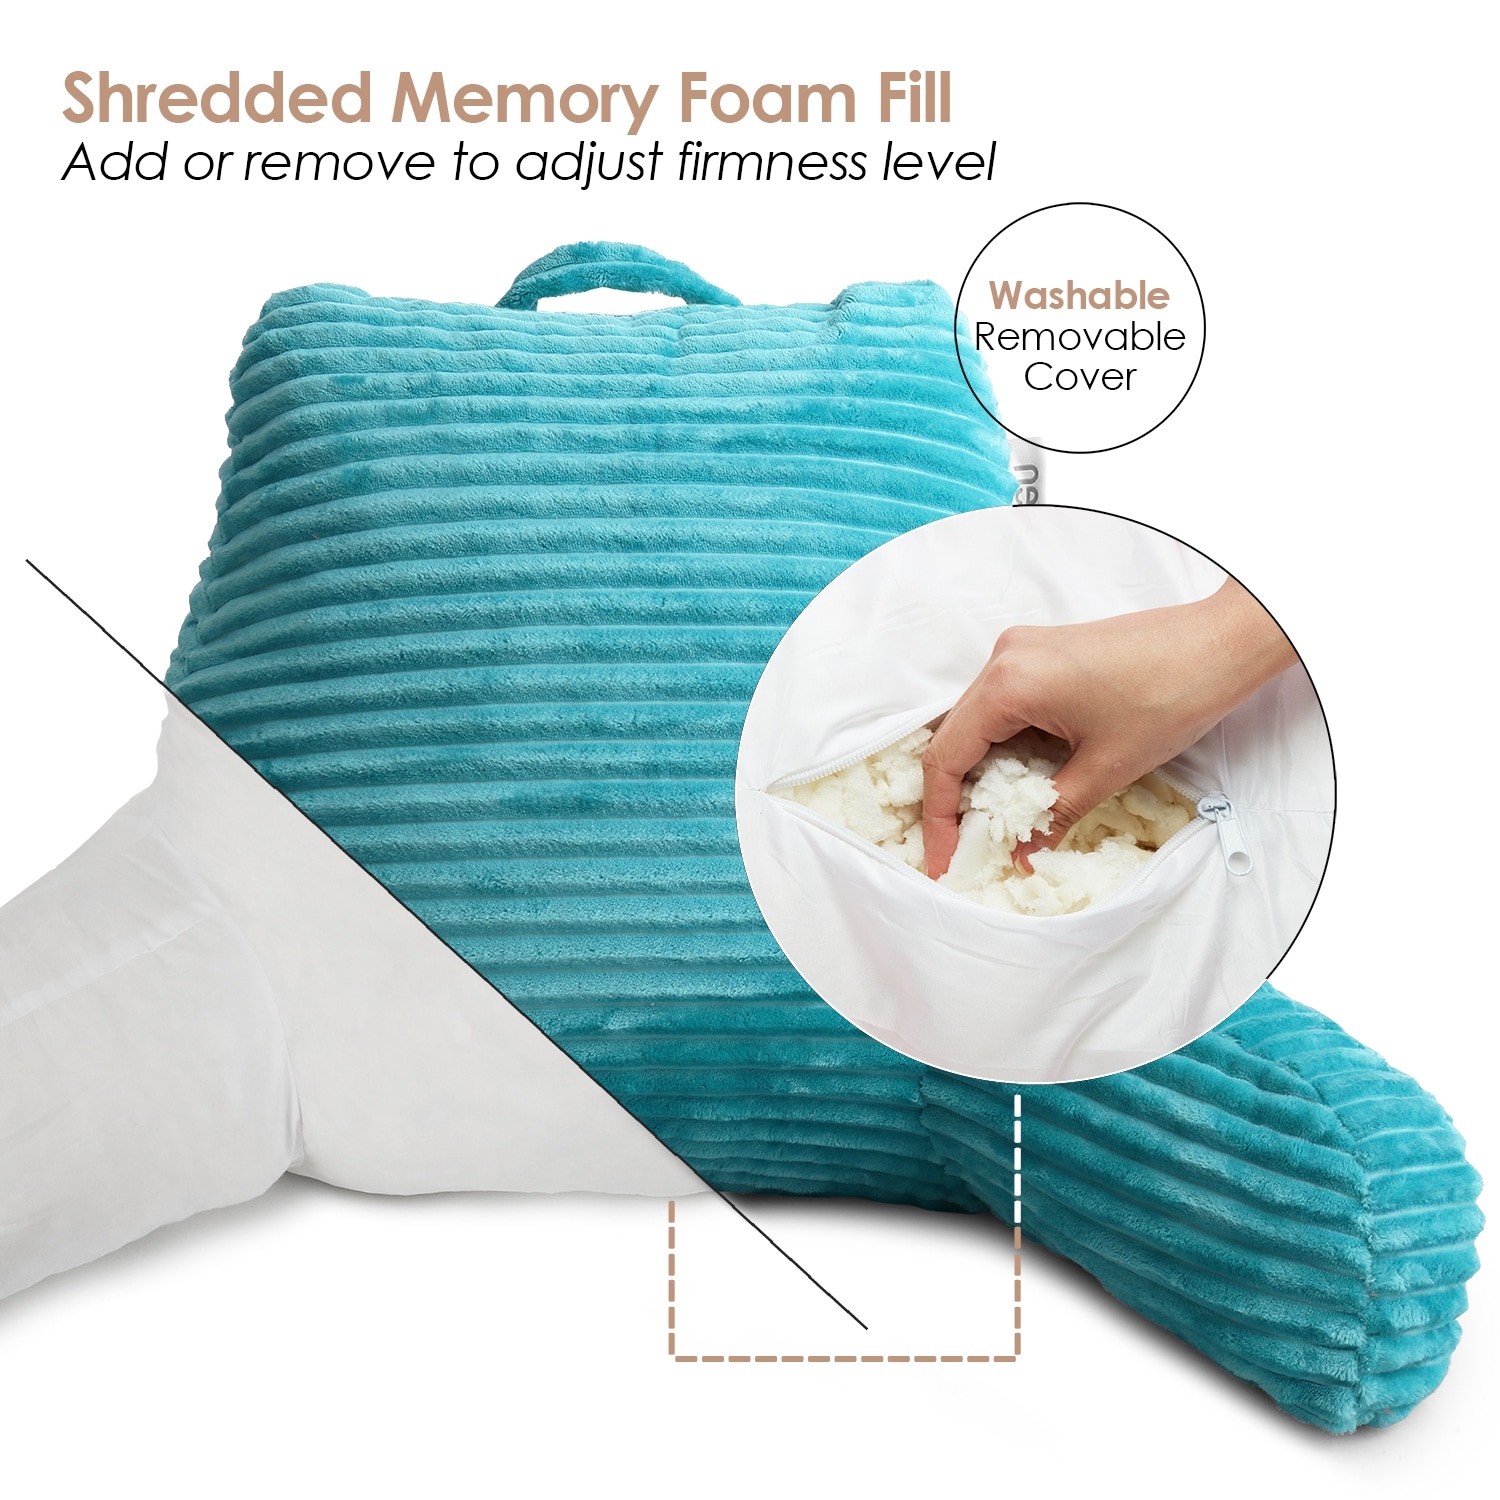 https://ak1.ostkcdn.com/images/products/is/images/direct/bf7845deff0a4015bfe77cac8ef6786996dc84e1/Nestl-Cut-Plush-Striped-Reading-Pillow---Back-Support-Shredded-Memory-Foam-Bed-Rest-Pillow-with-Arms.jpg